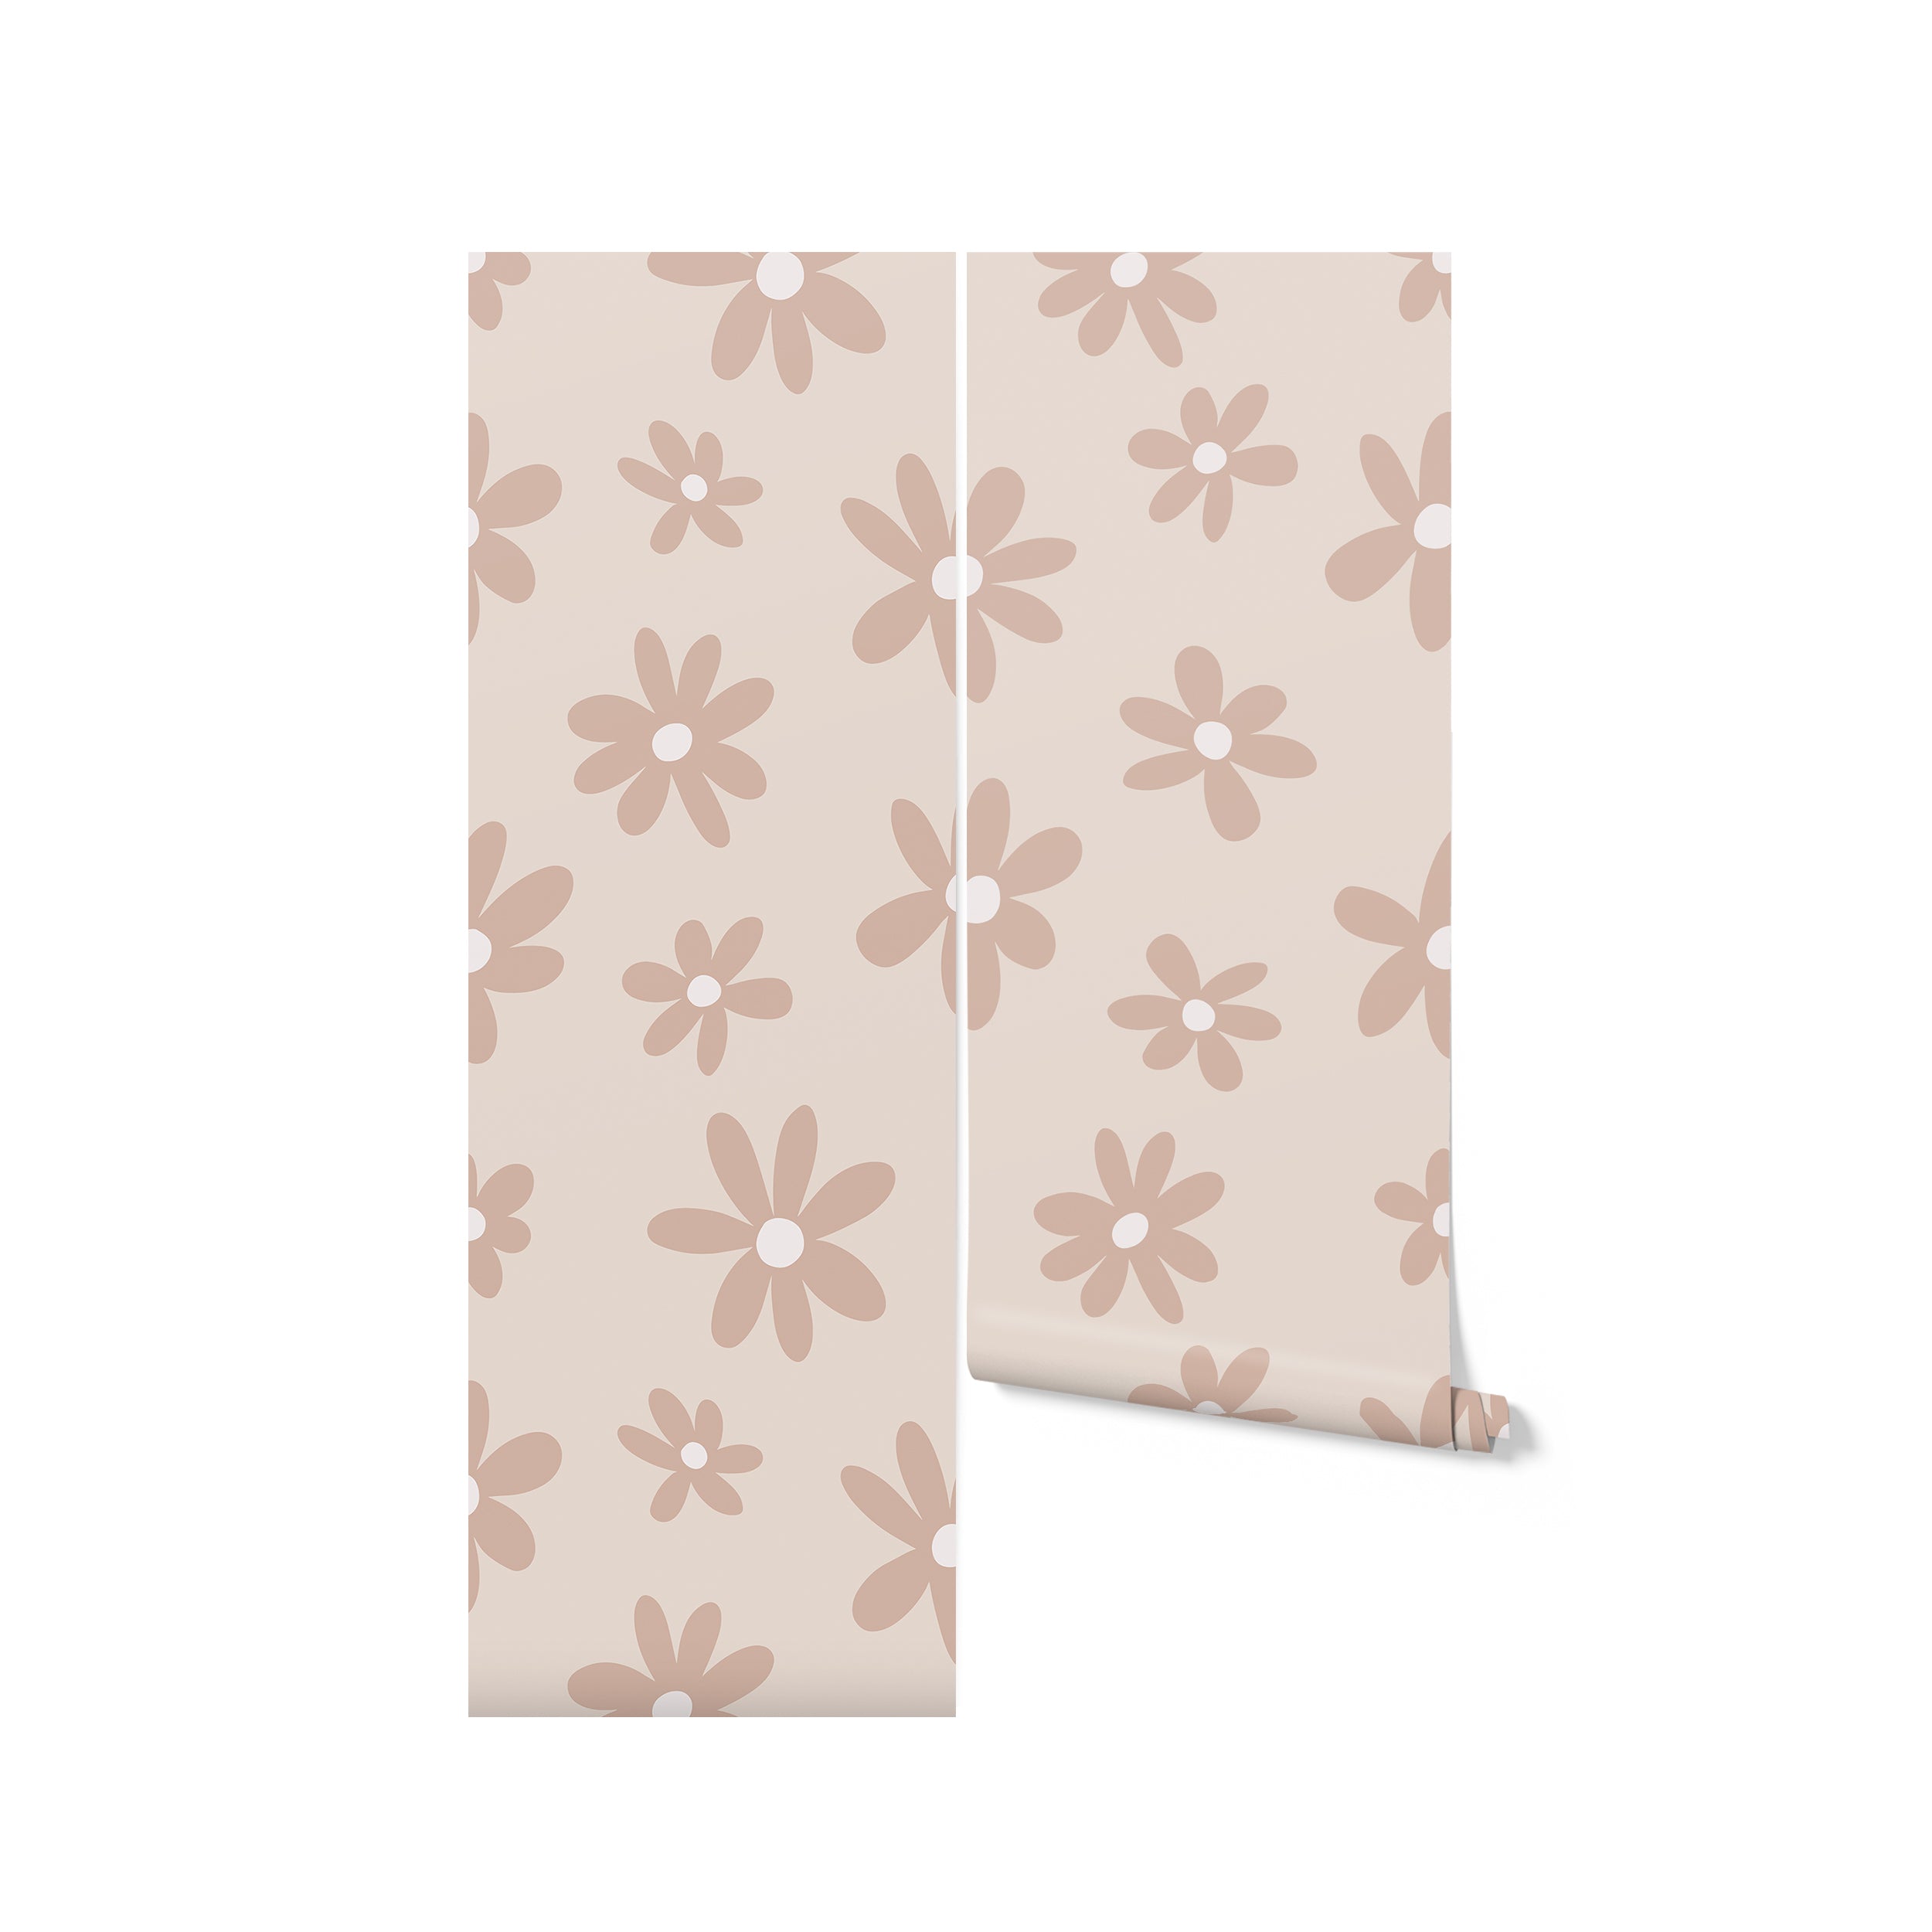 A roll of Simple Mauve Floral Wallpaper displayed upright, showcasing its delicate, large mauve flowers on a light beige background. This wallpaper design is ideal for adding a touch of understated elegance to any space.